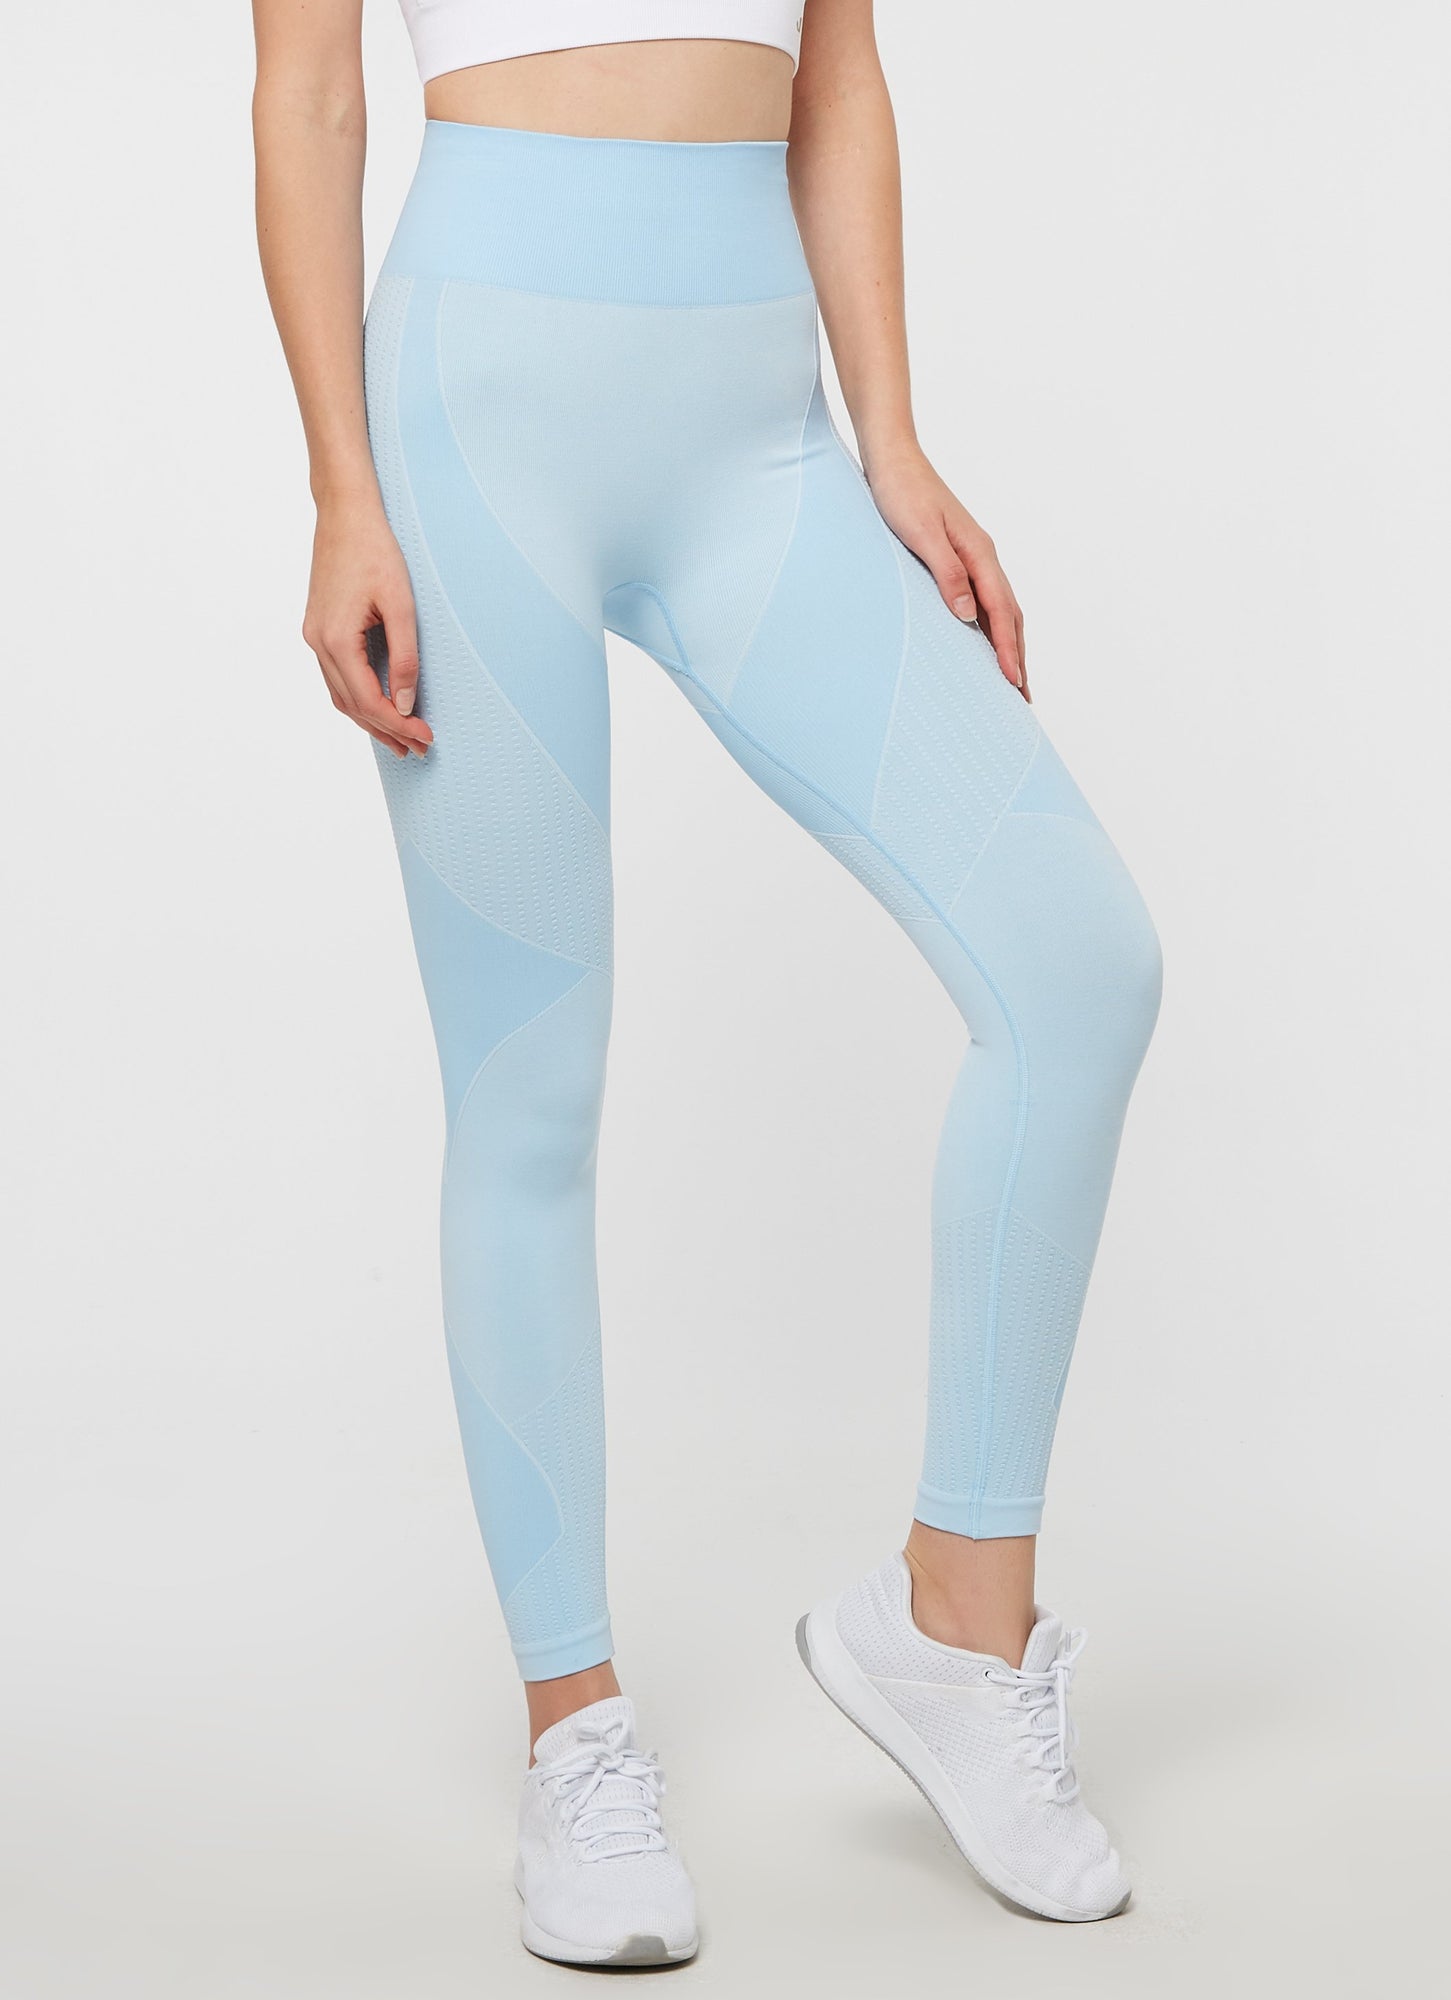 Hfyihgf High Waisted Leggings for Women Gradient Color Comfy Tummy Control  Slimming Yoga Pants Workout Running Tights Trousers(Light Blue,S) -  Walmart.com